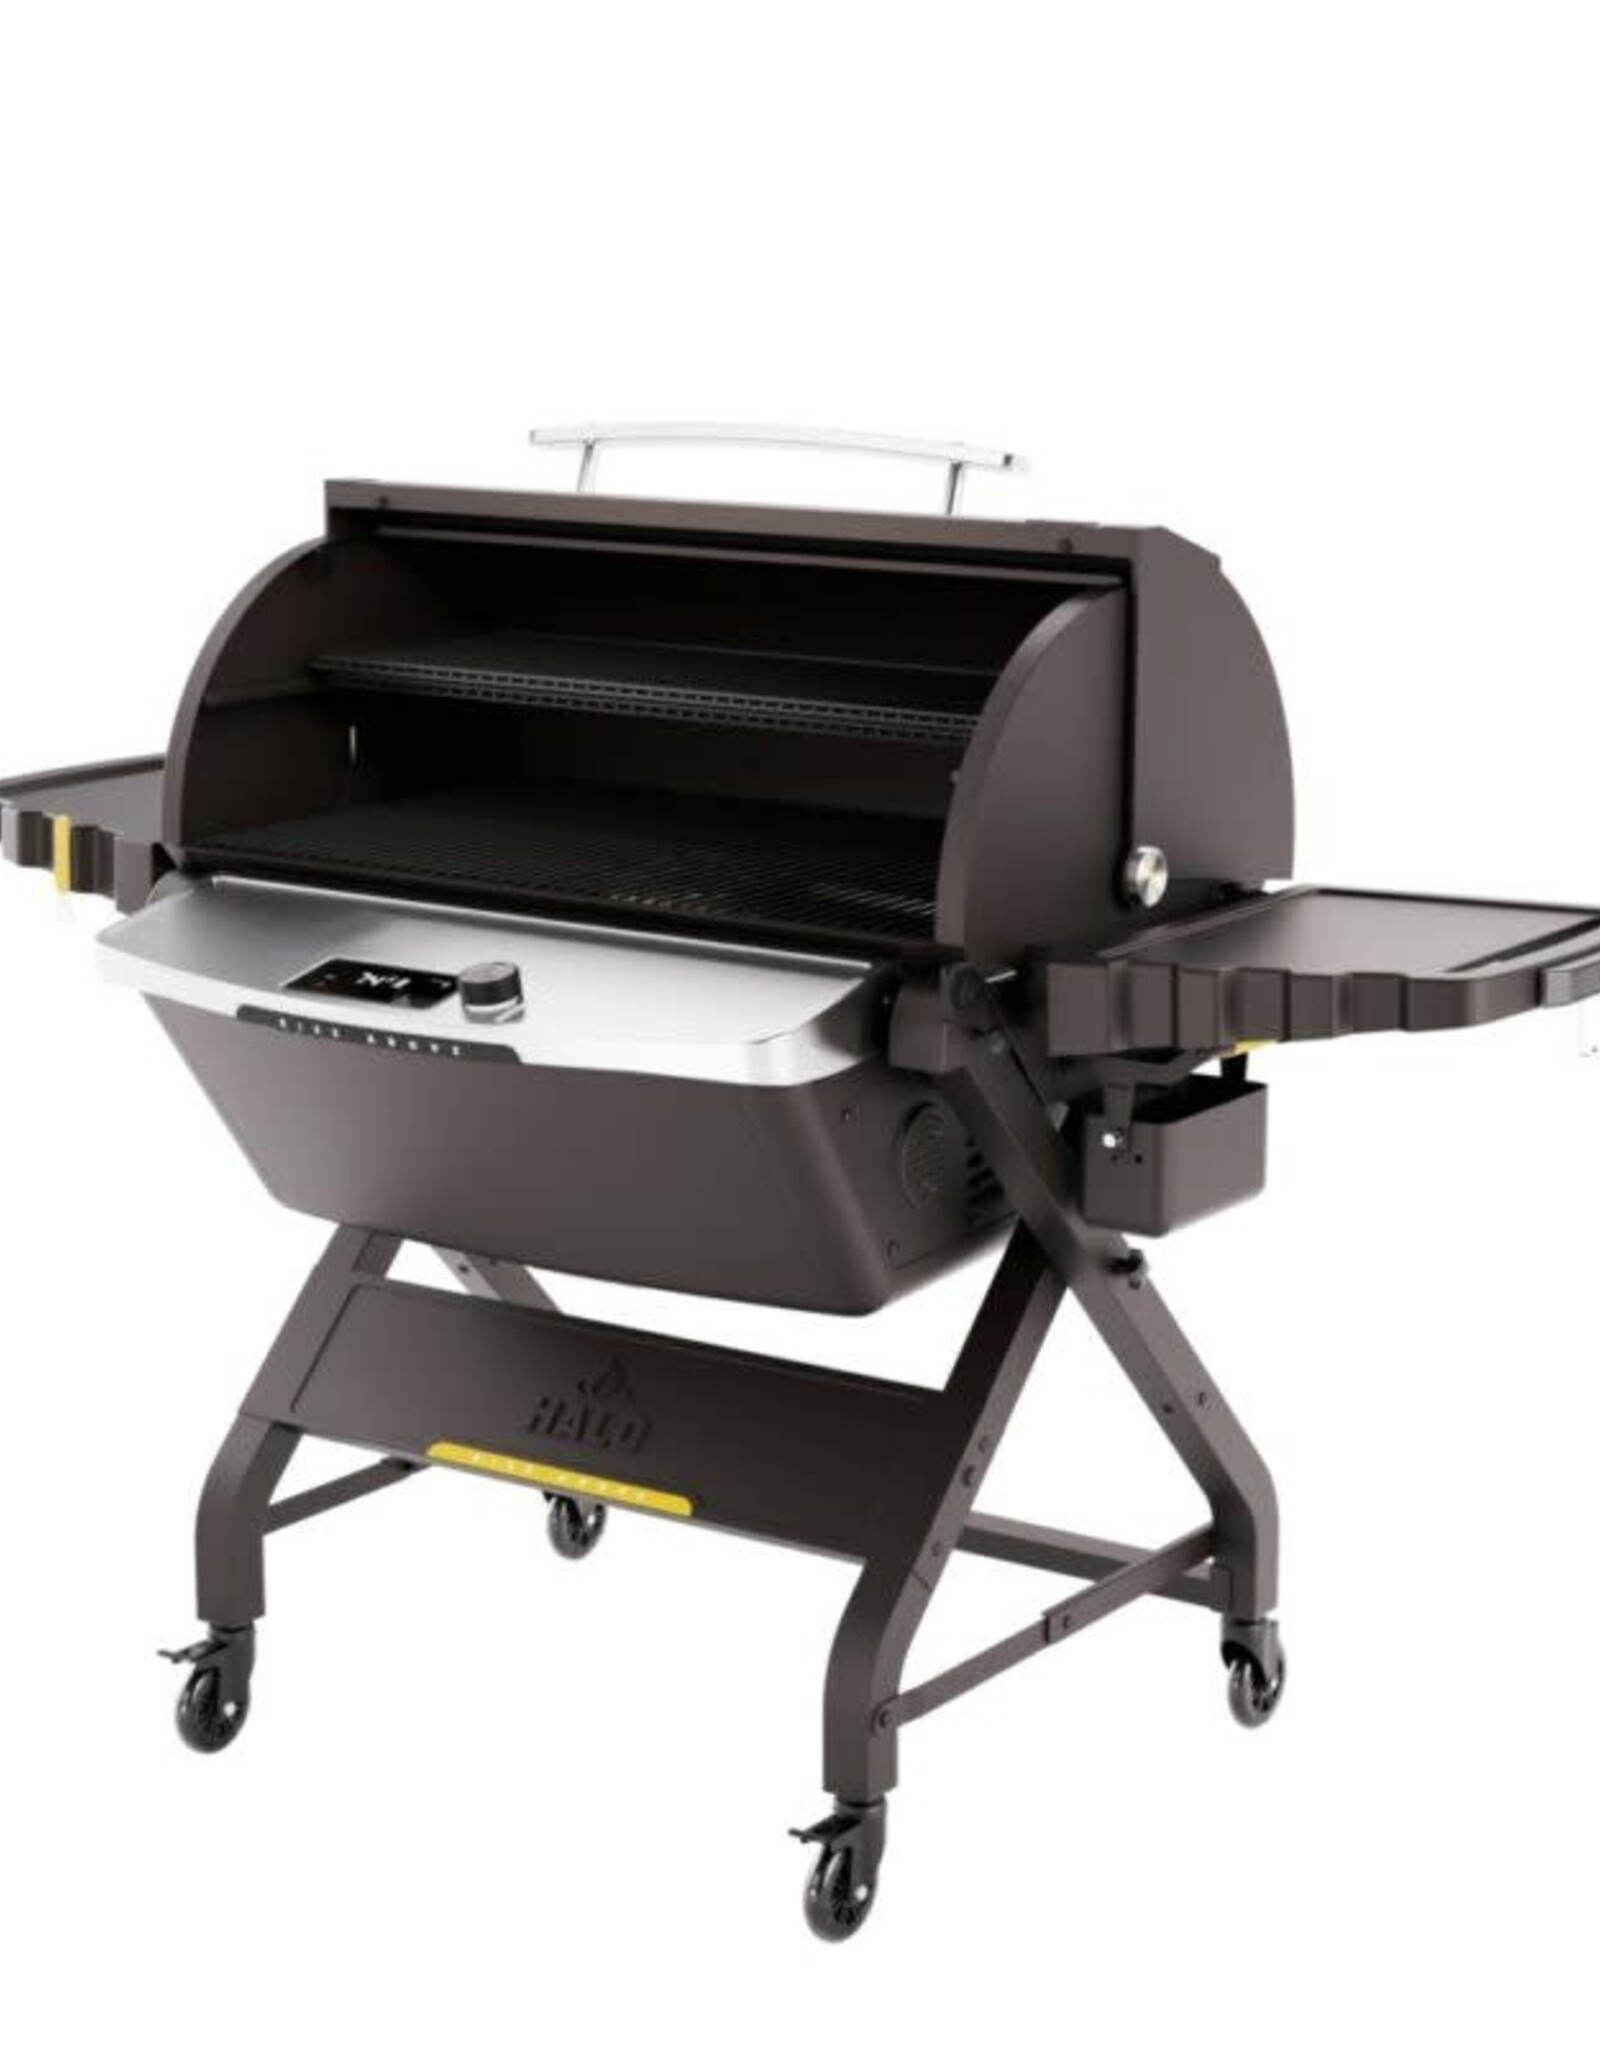 Halo Products Group Halo Prime1500 Pellet Grill X Cart - HS-1004-XNA